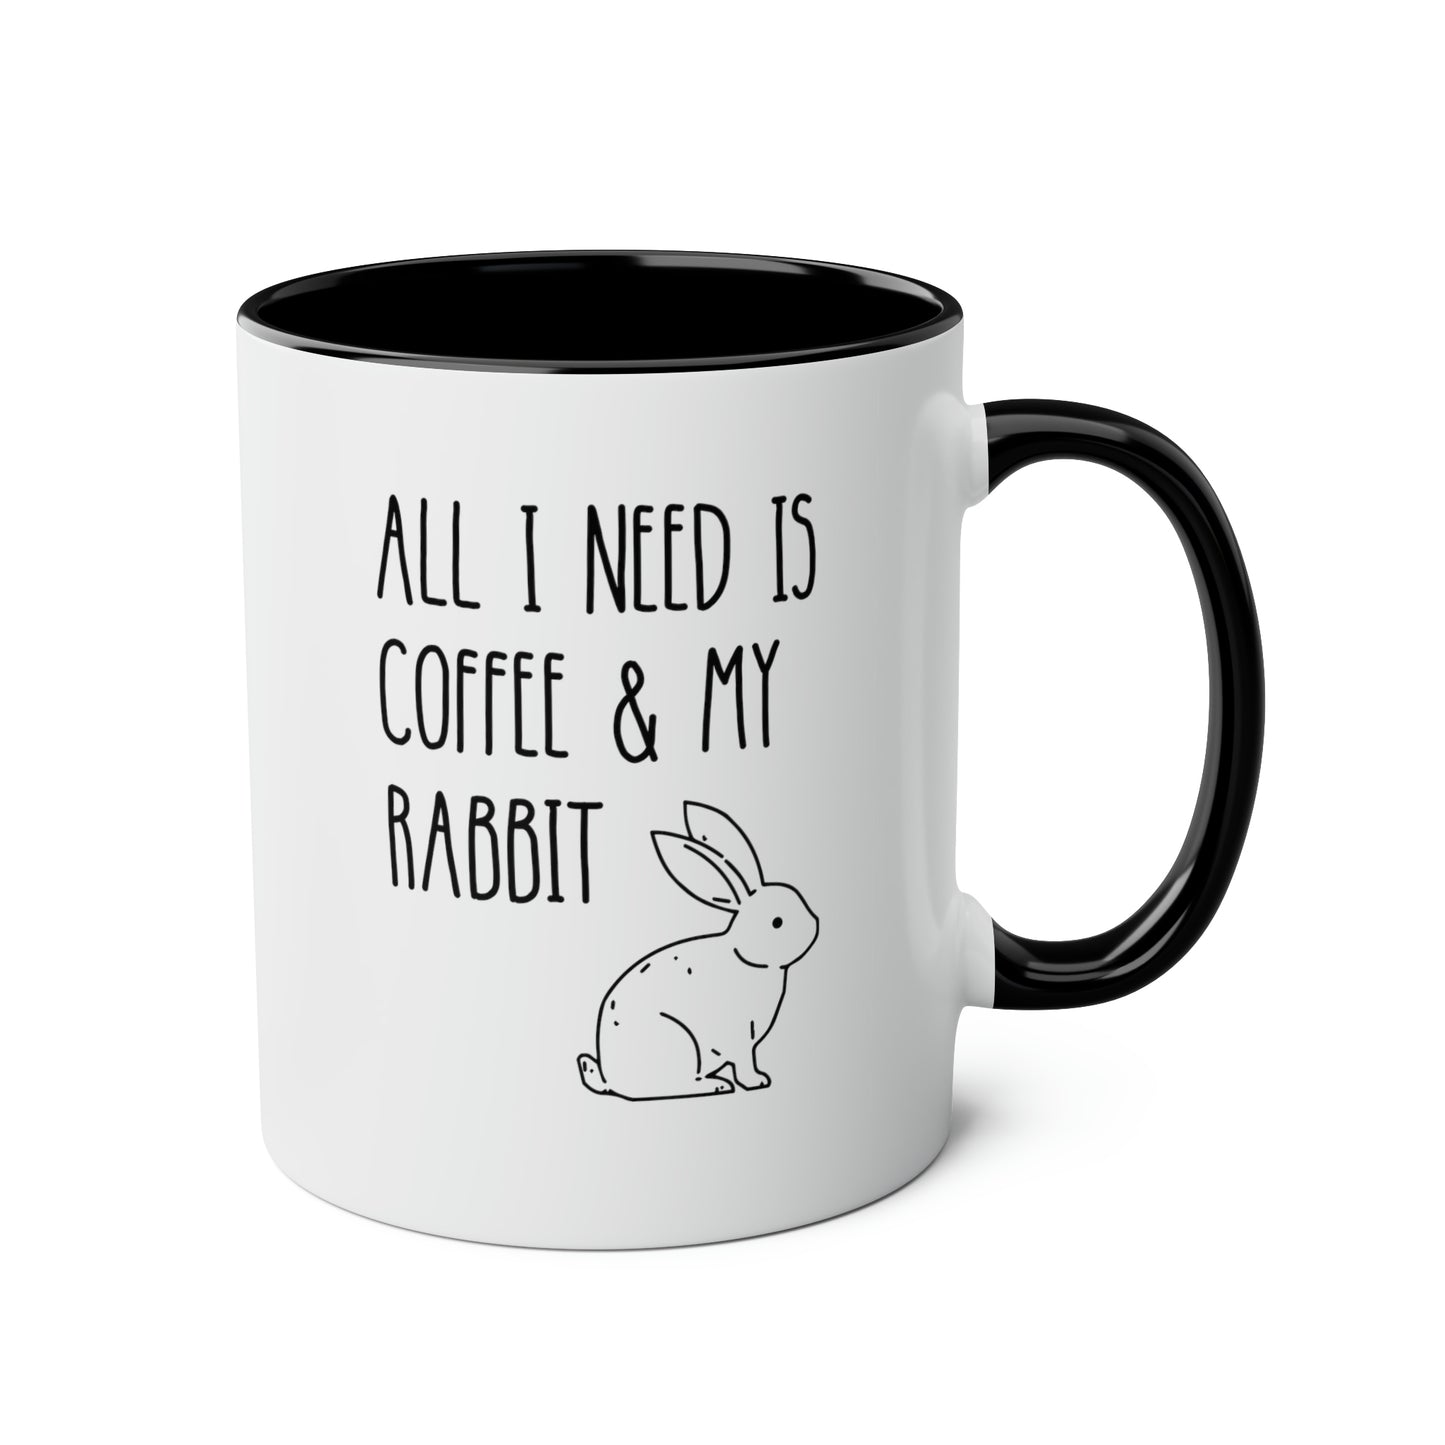 All I Need Is Coffee And My Rabbit 11oz white with black accent funny large coffee mug gift for her mom dad birthday bunny lover pet owner furparent waveywares wavey wares wavywares wavy wares